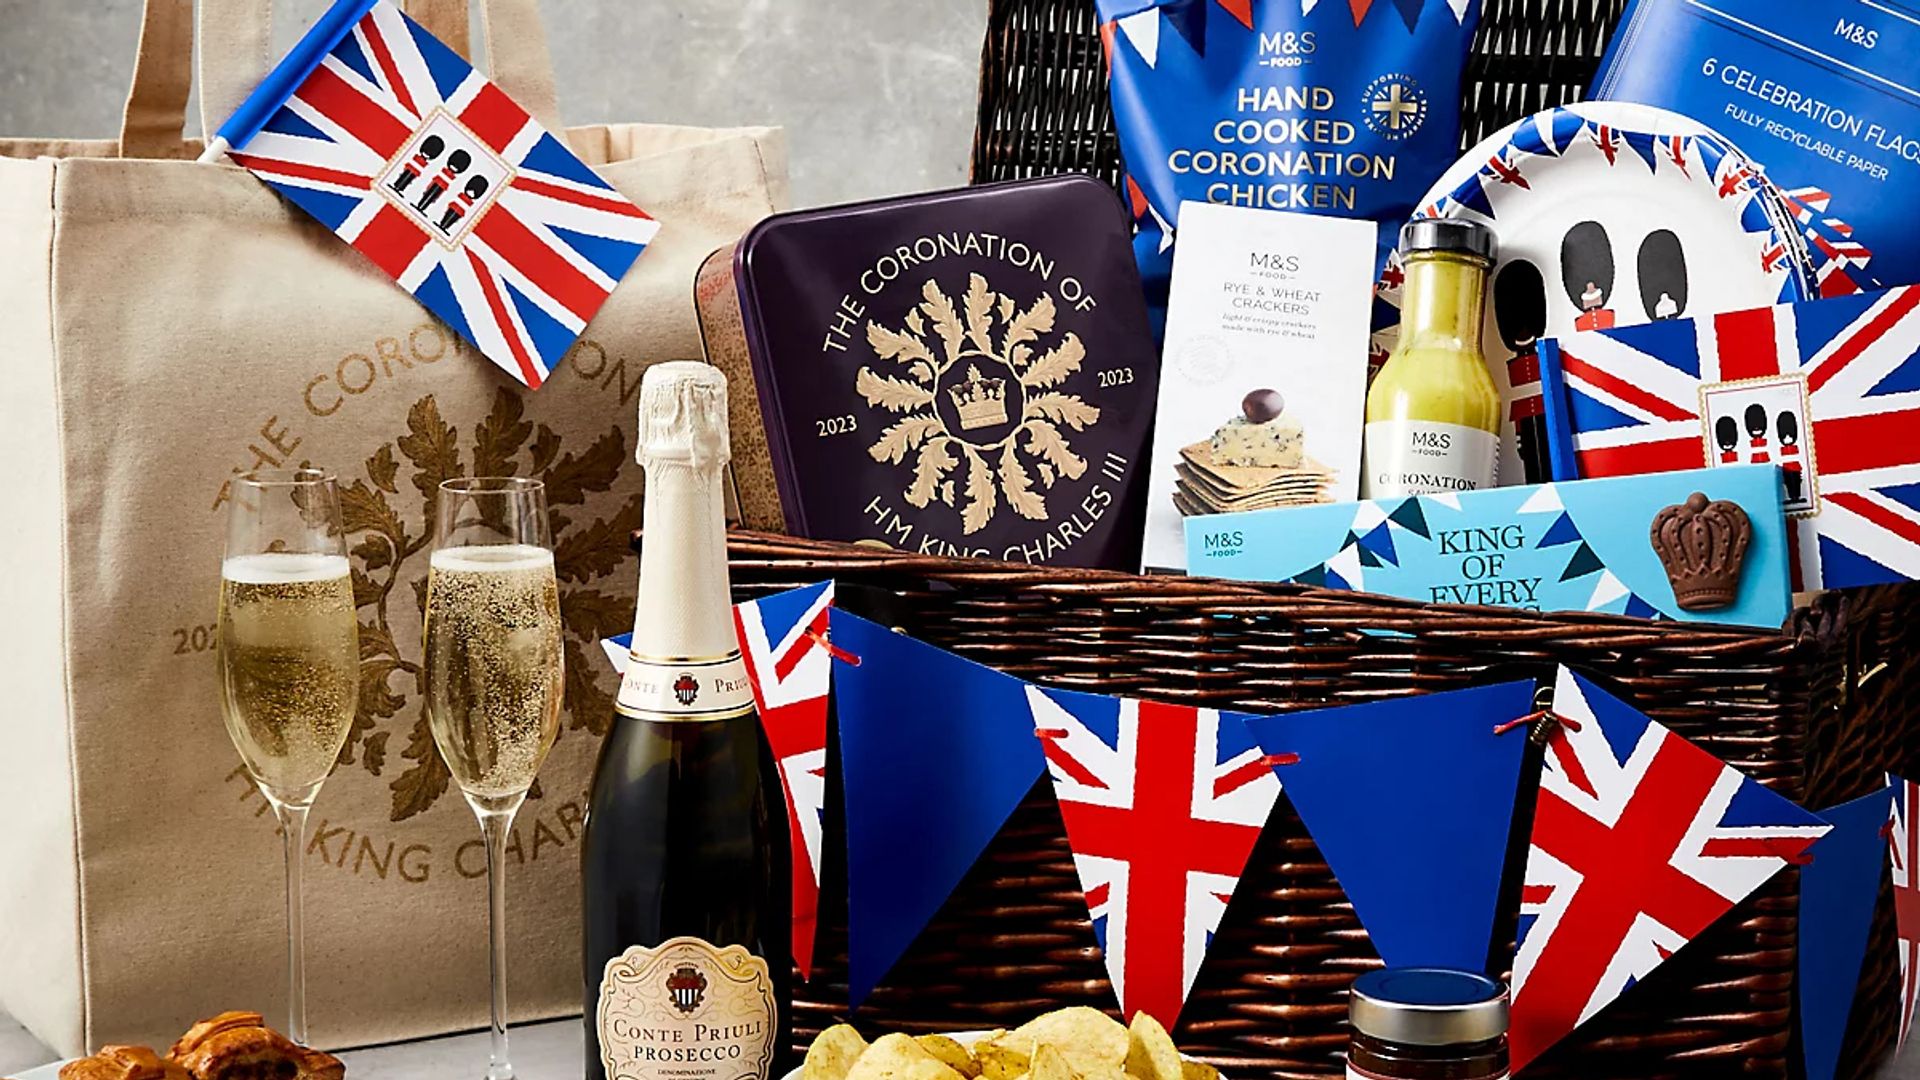 Best coronation hampers for King Charles